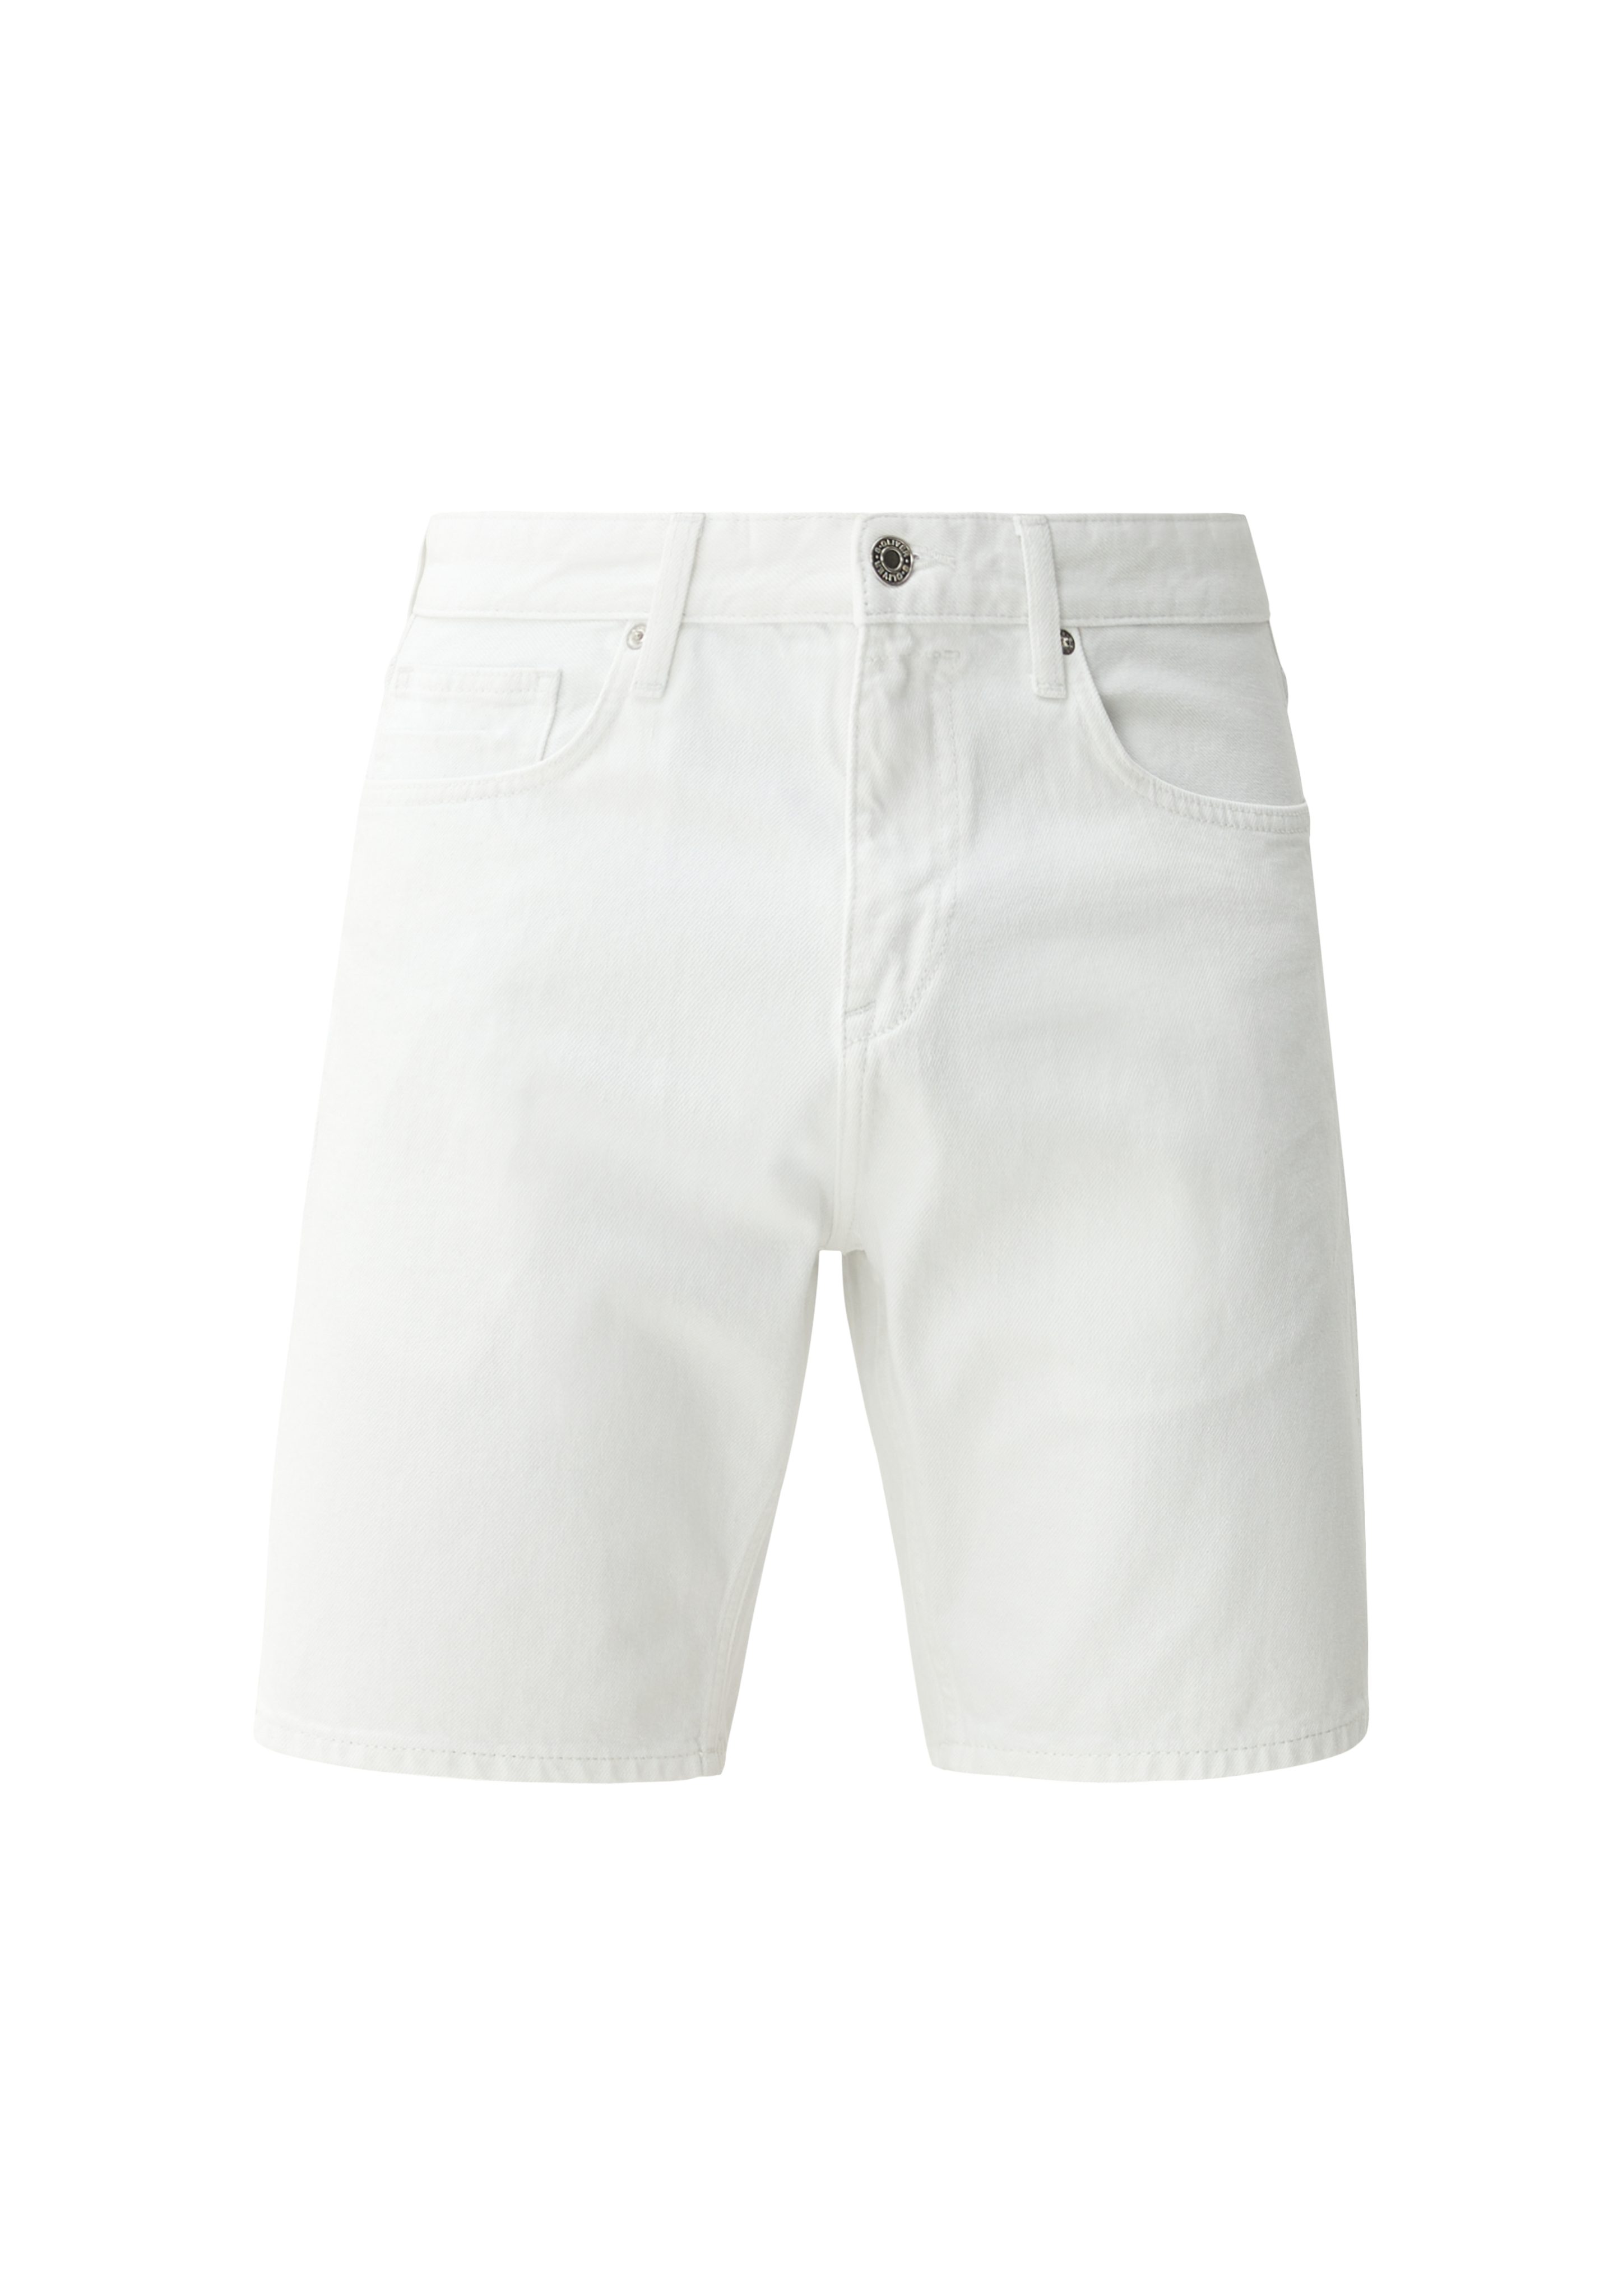 Regular Fit Rise Straight / Jeansshorts / Mid Jeans-Shorts s.Oliver / Leg